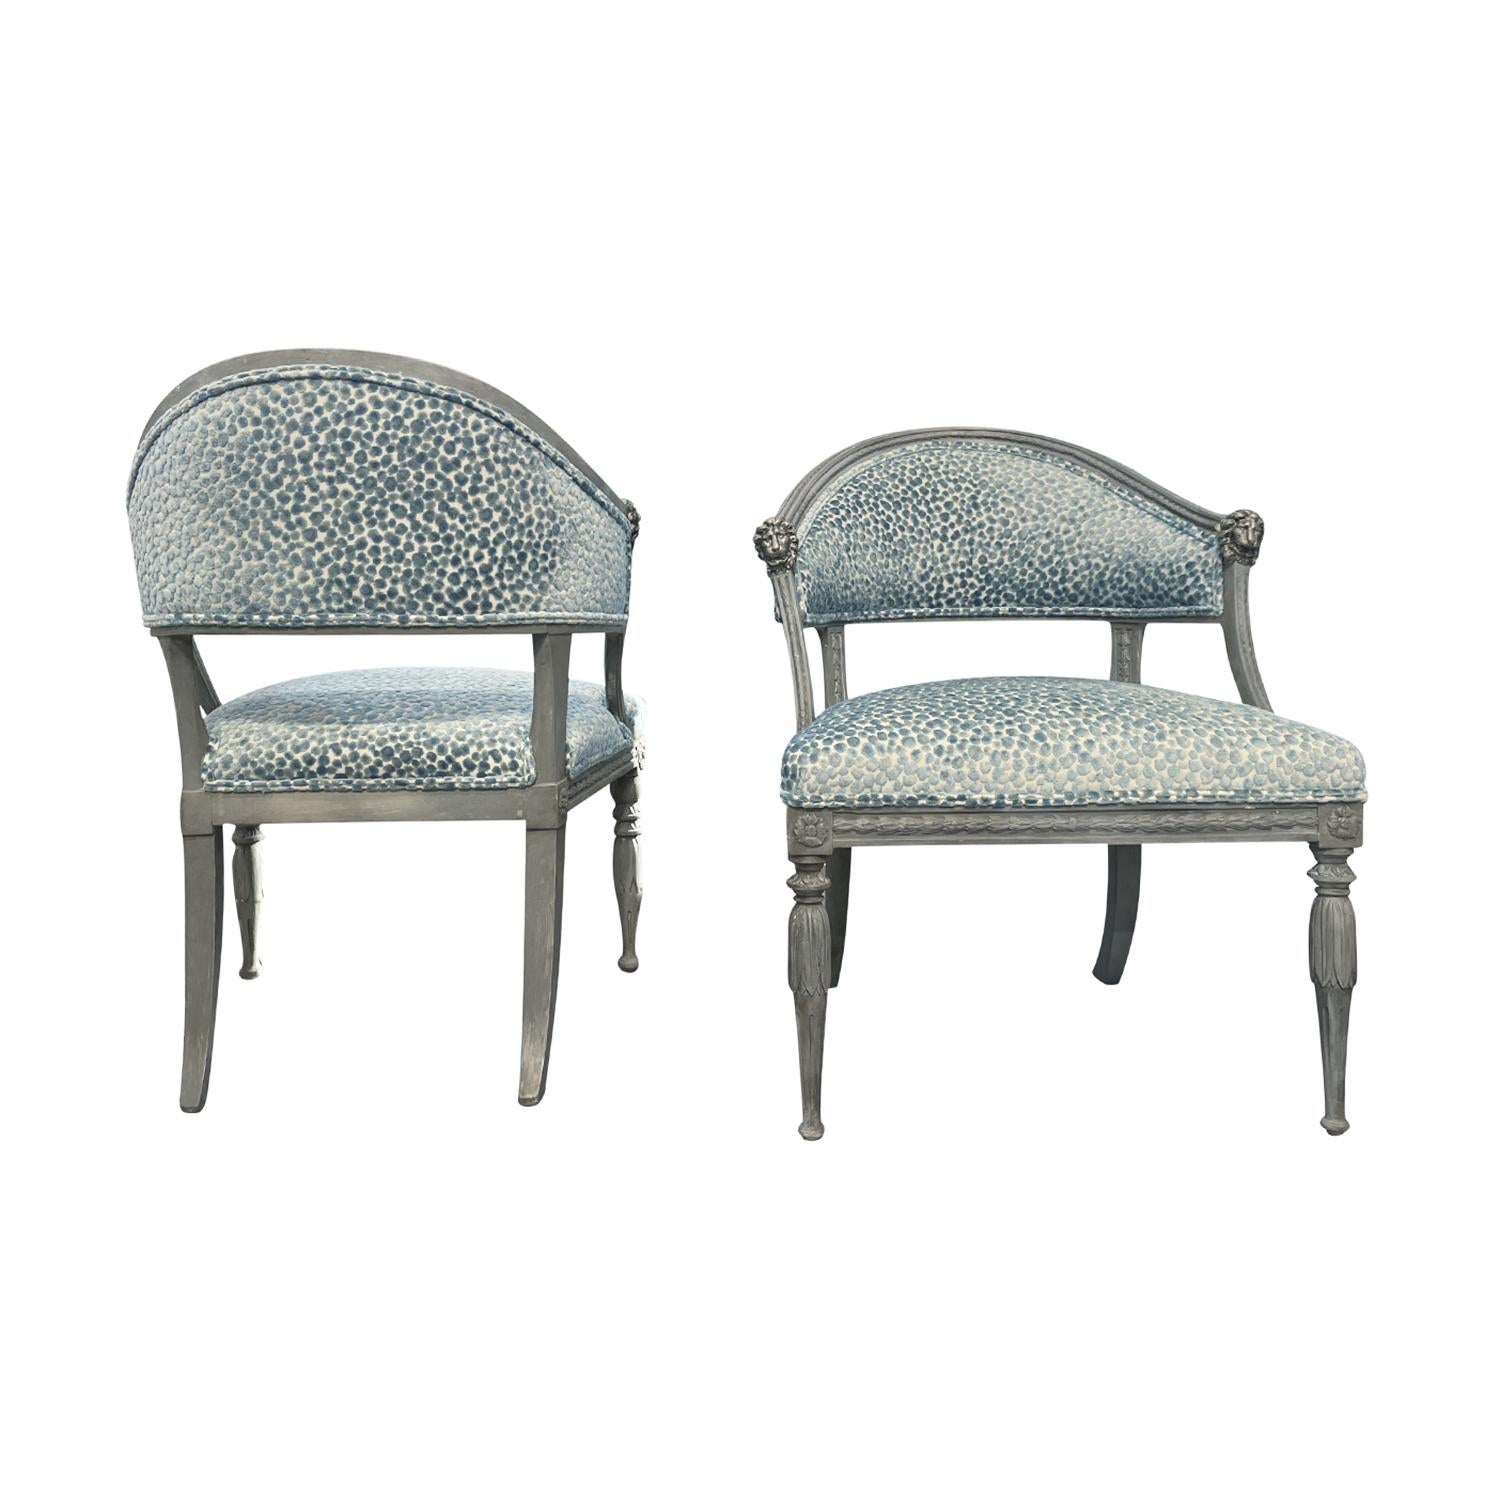 A grey, antique Swedish Gustavian set of similar armchairs made of hand crafted painted Birchwood, designed and produced most likely by Ephraim Ståhl in good condition. The Scandinavian side, end chairs have a half rounded backrest with slim